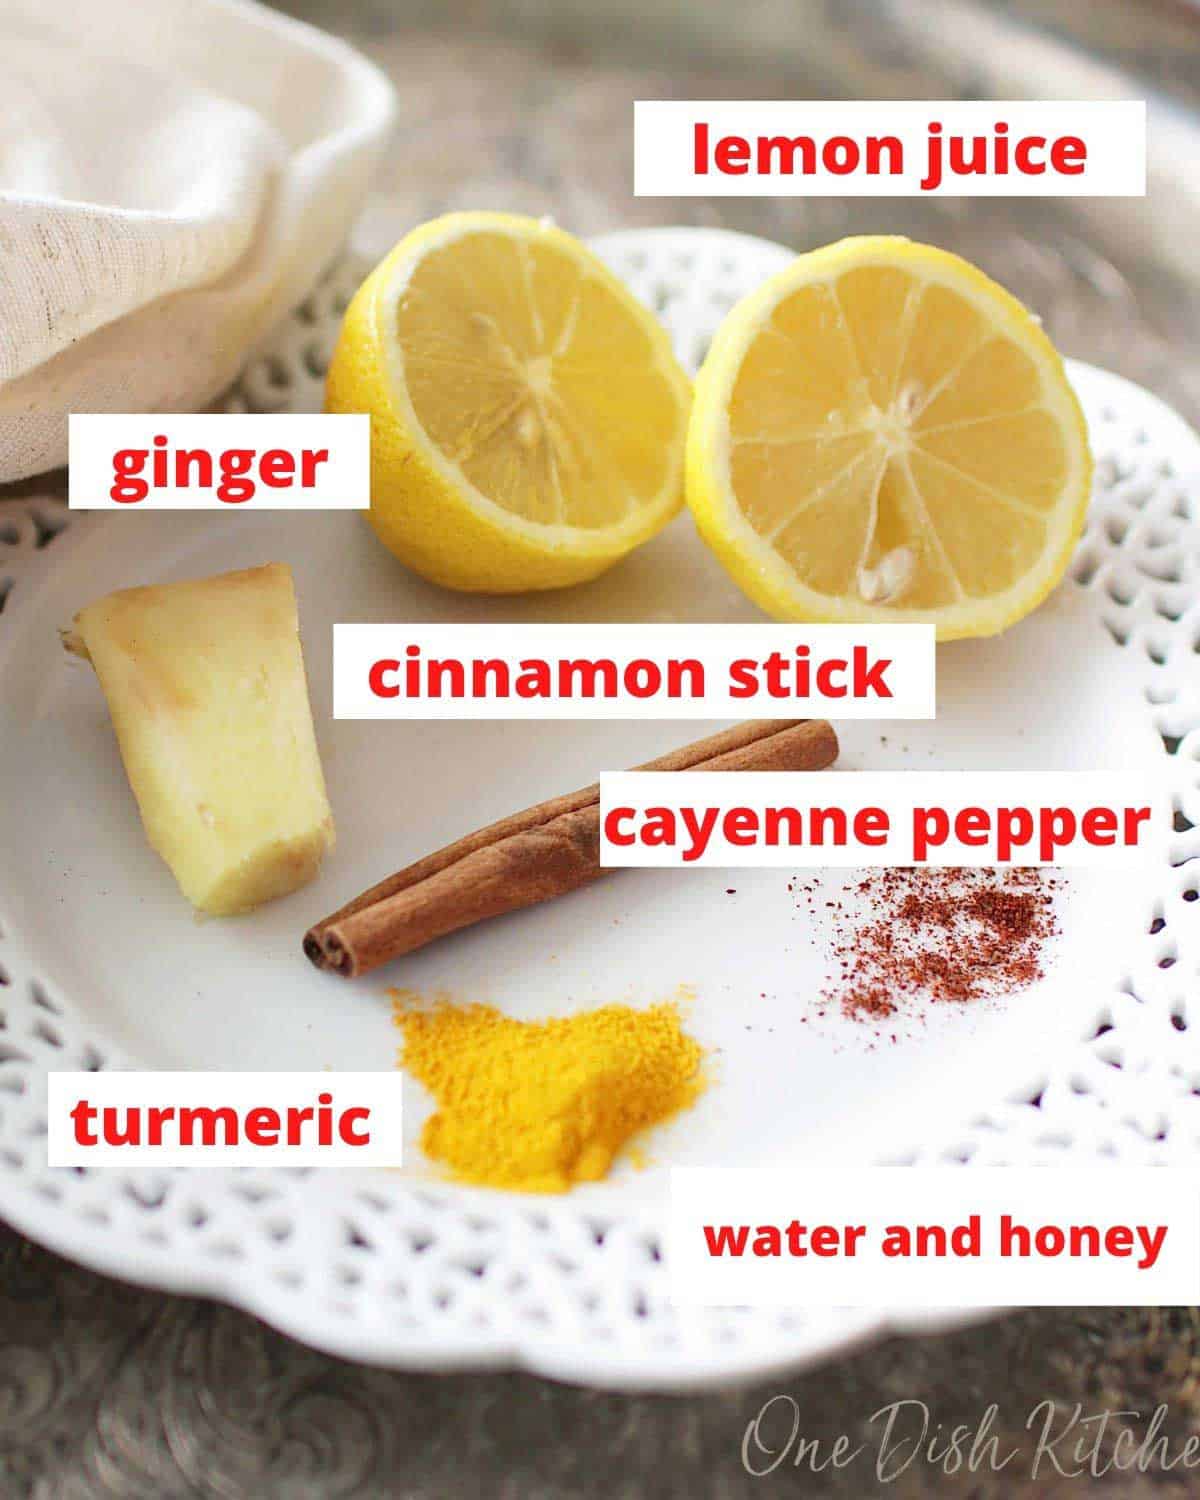 ginger, lemon juice, cinnamon and spices on a plate.